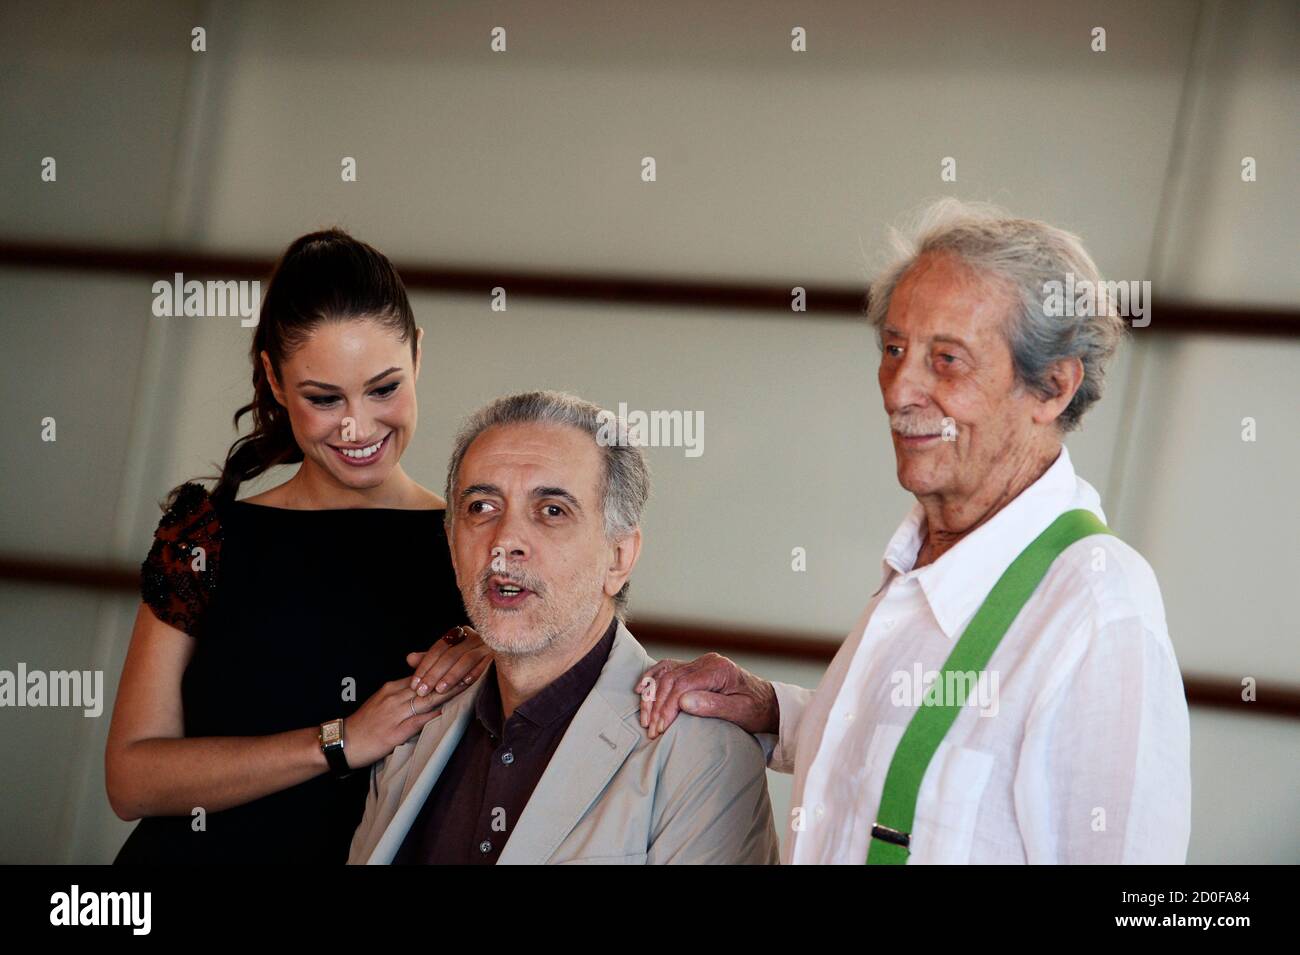 Cast members Aida Folch (L) and Jean Rochefort (R) pose with director Fernando Trueba at a photocall to promote 'El Artista y La Modelo' (The artist and the model) at the Kursaal Centre on the fourth day of the San Sebastian Film Festival September 24, 2012. The film is part of the festival's Official Selection. REUTERS/Vincent West (SPAIN - Tags: ENTERTAINMENT) Stock Photo